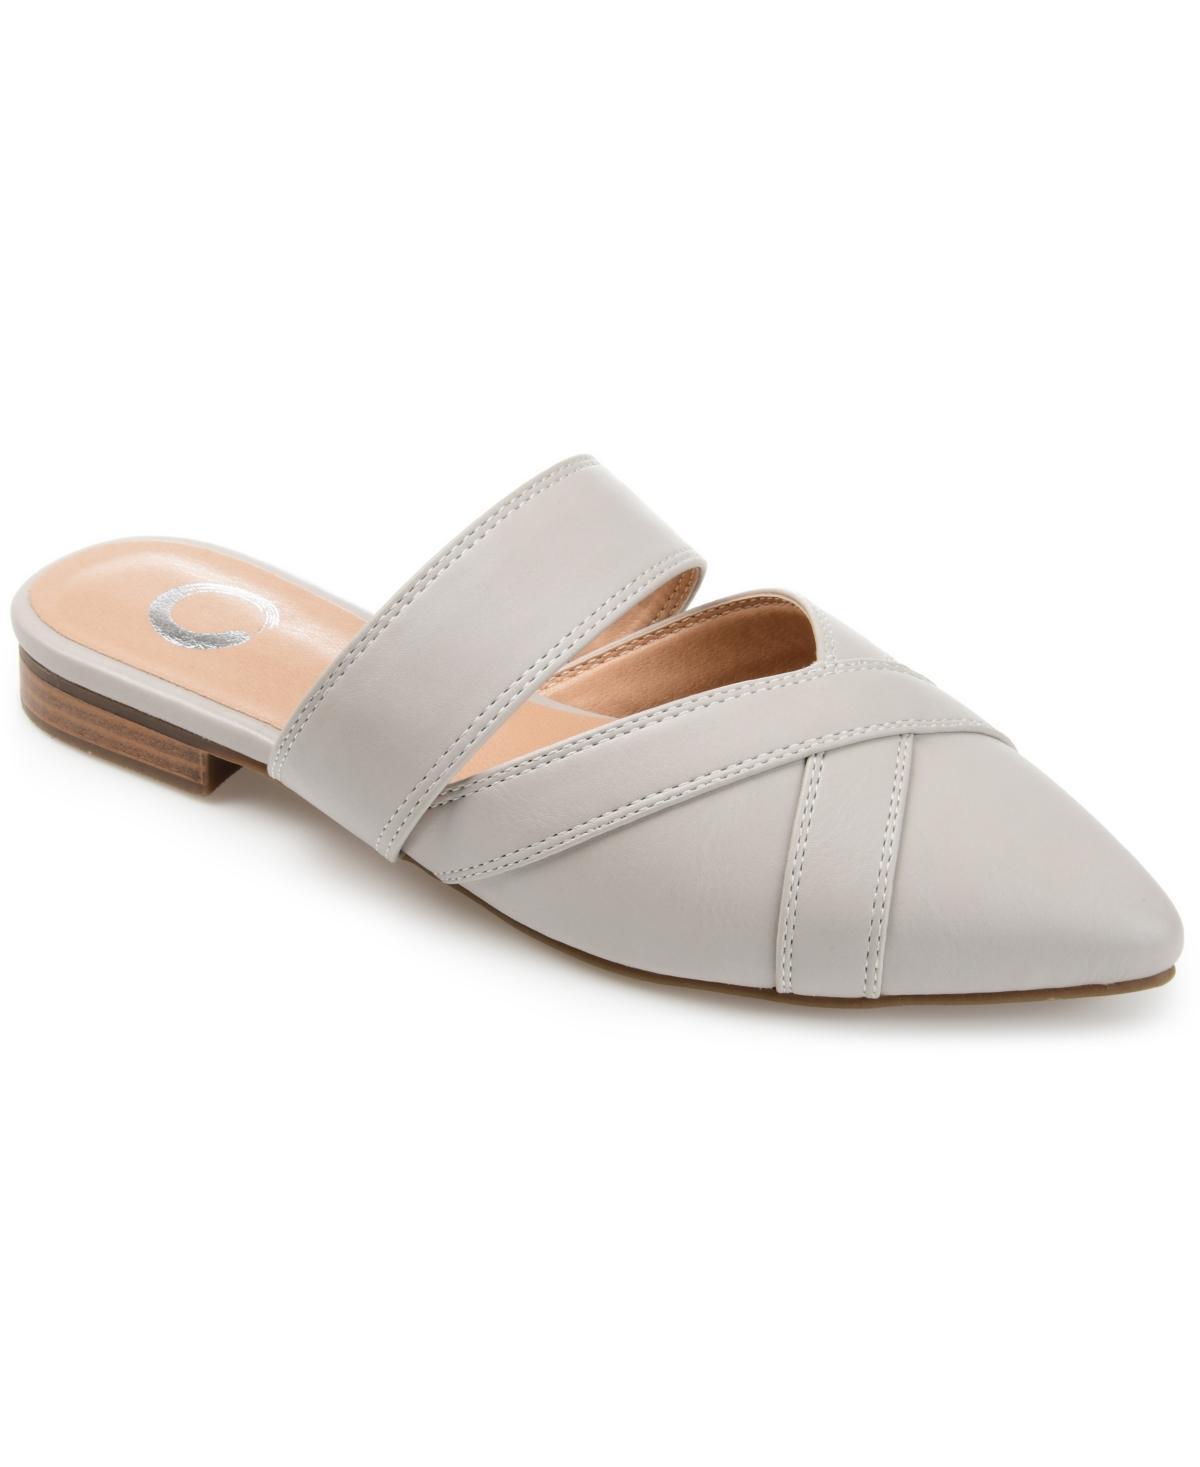 Journee Collection Stasi Womens Mules White Product Image